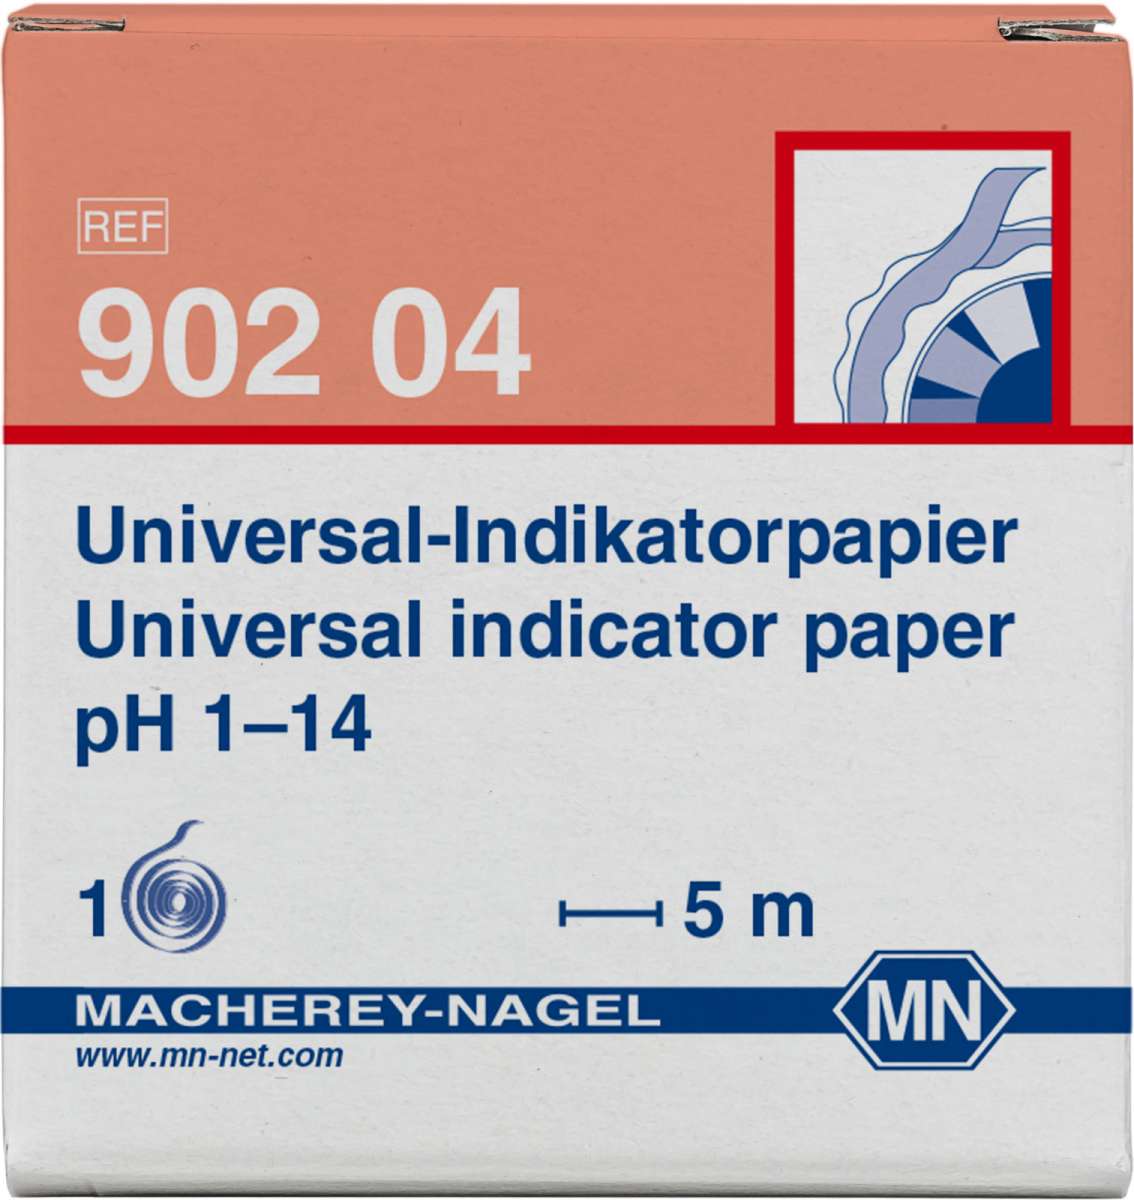 Universal indicator paper pH 1 to 14 (Reel of 5m length and 7mm width)